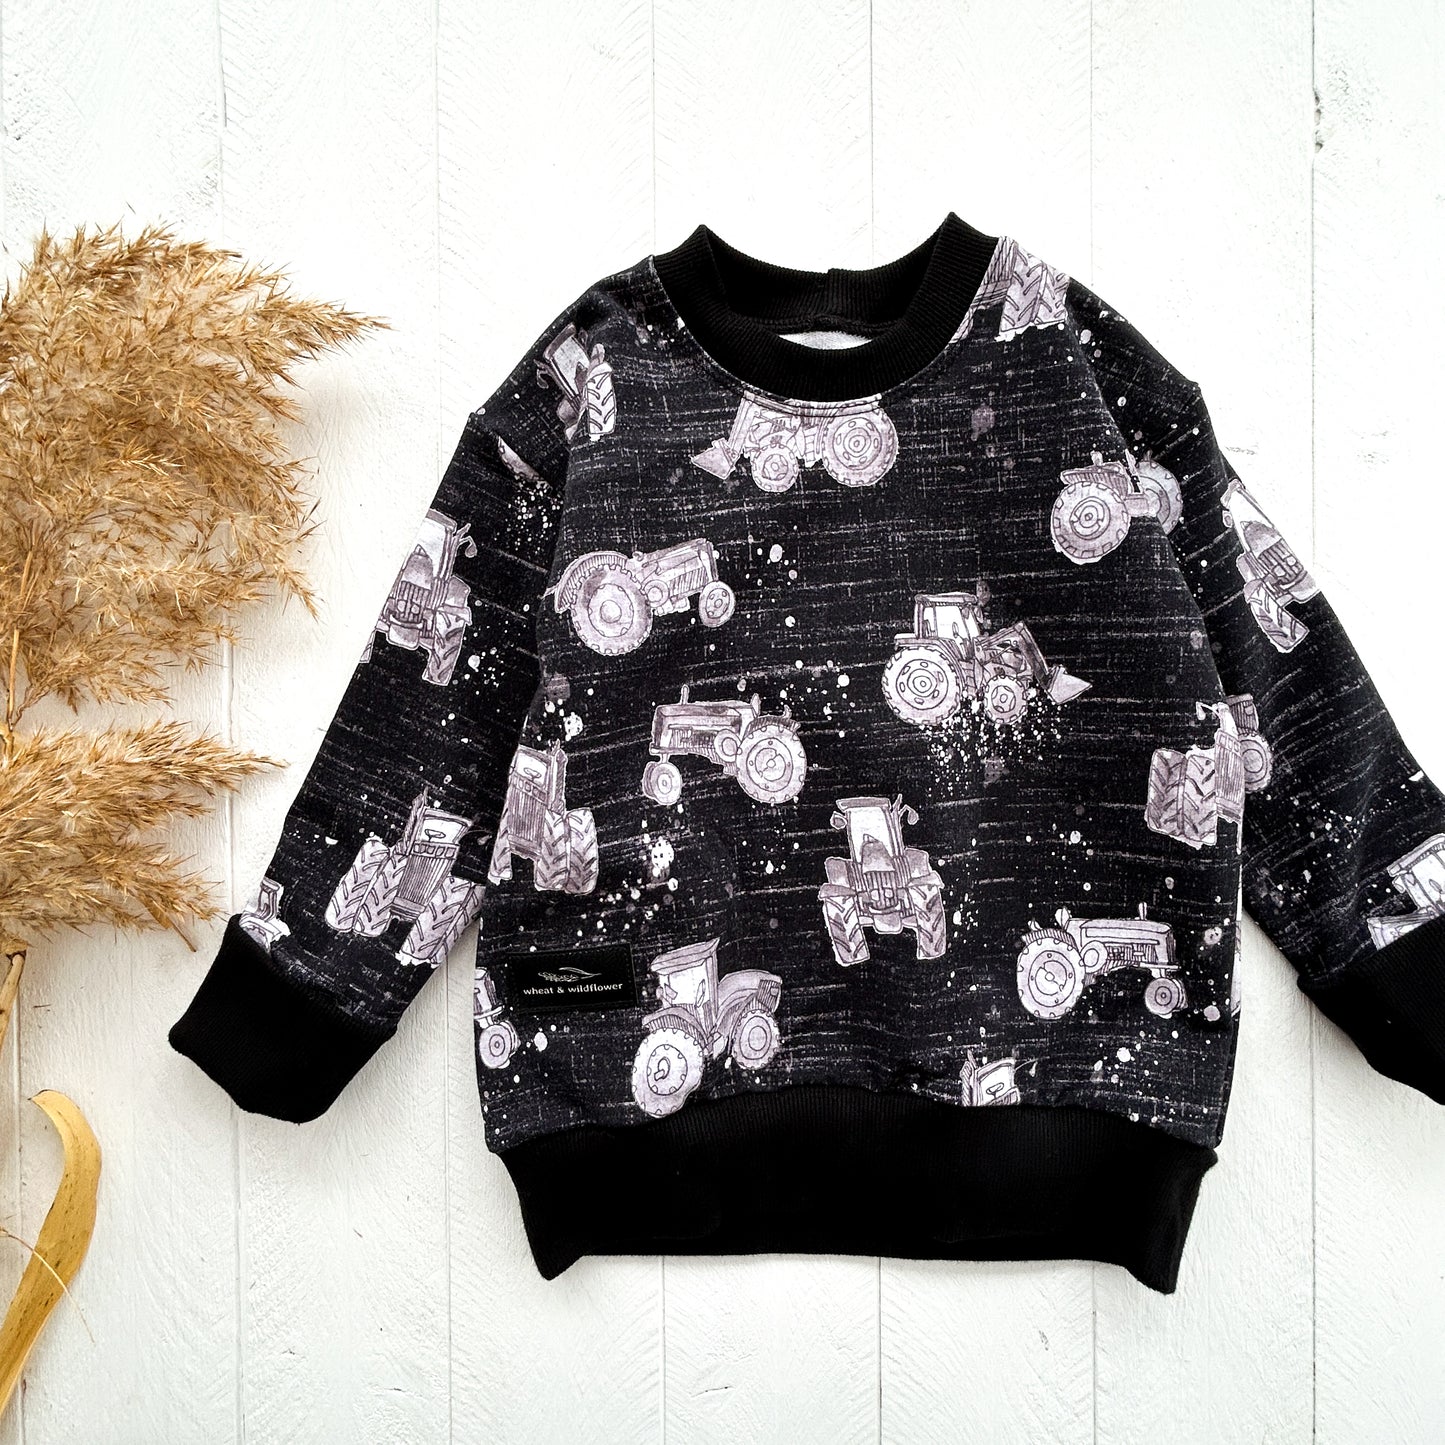 Antique Tractors Lounge Sweater